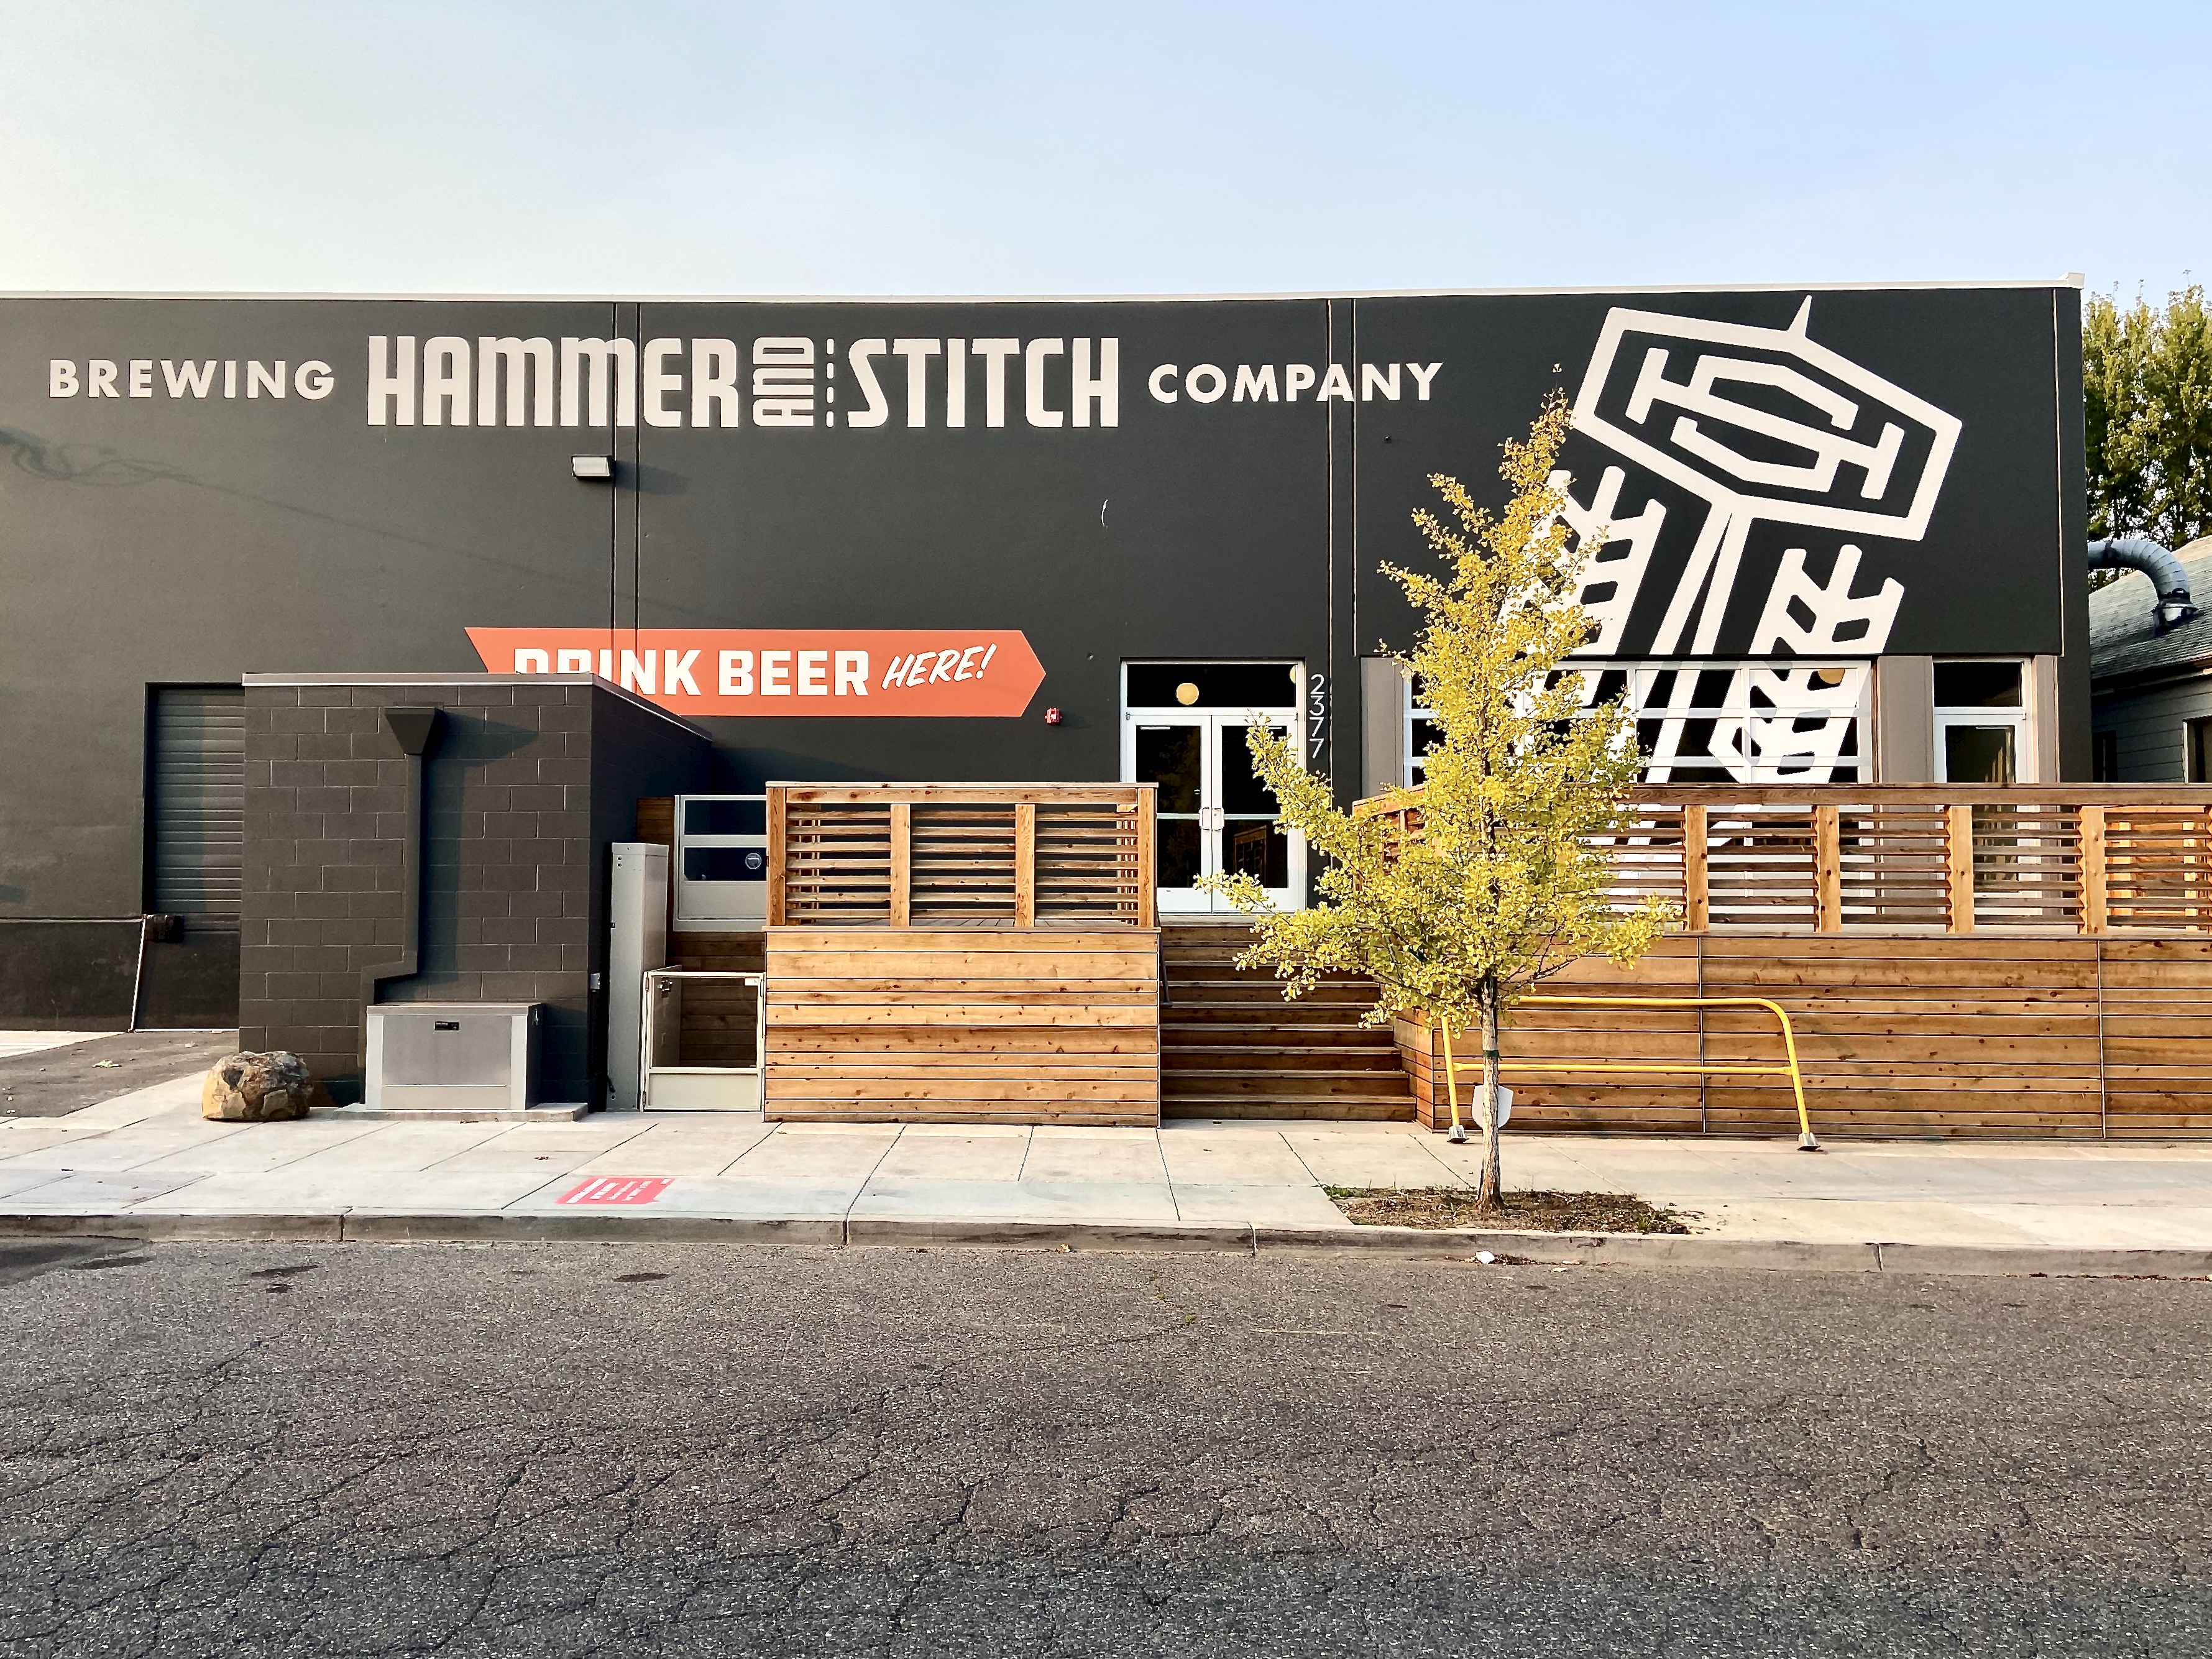 Portland's latest brewery, Hammer & Stitch Brewing Co., opens on Saturday, October 10, 2020.